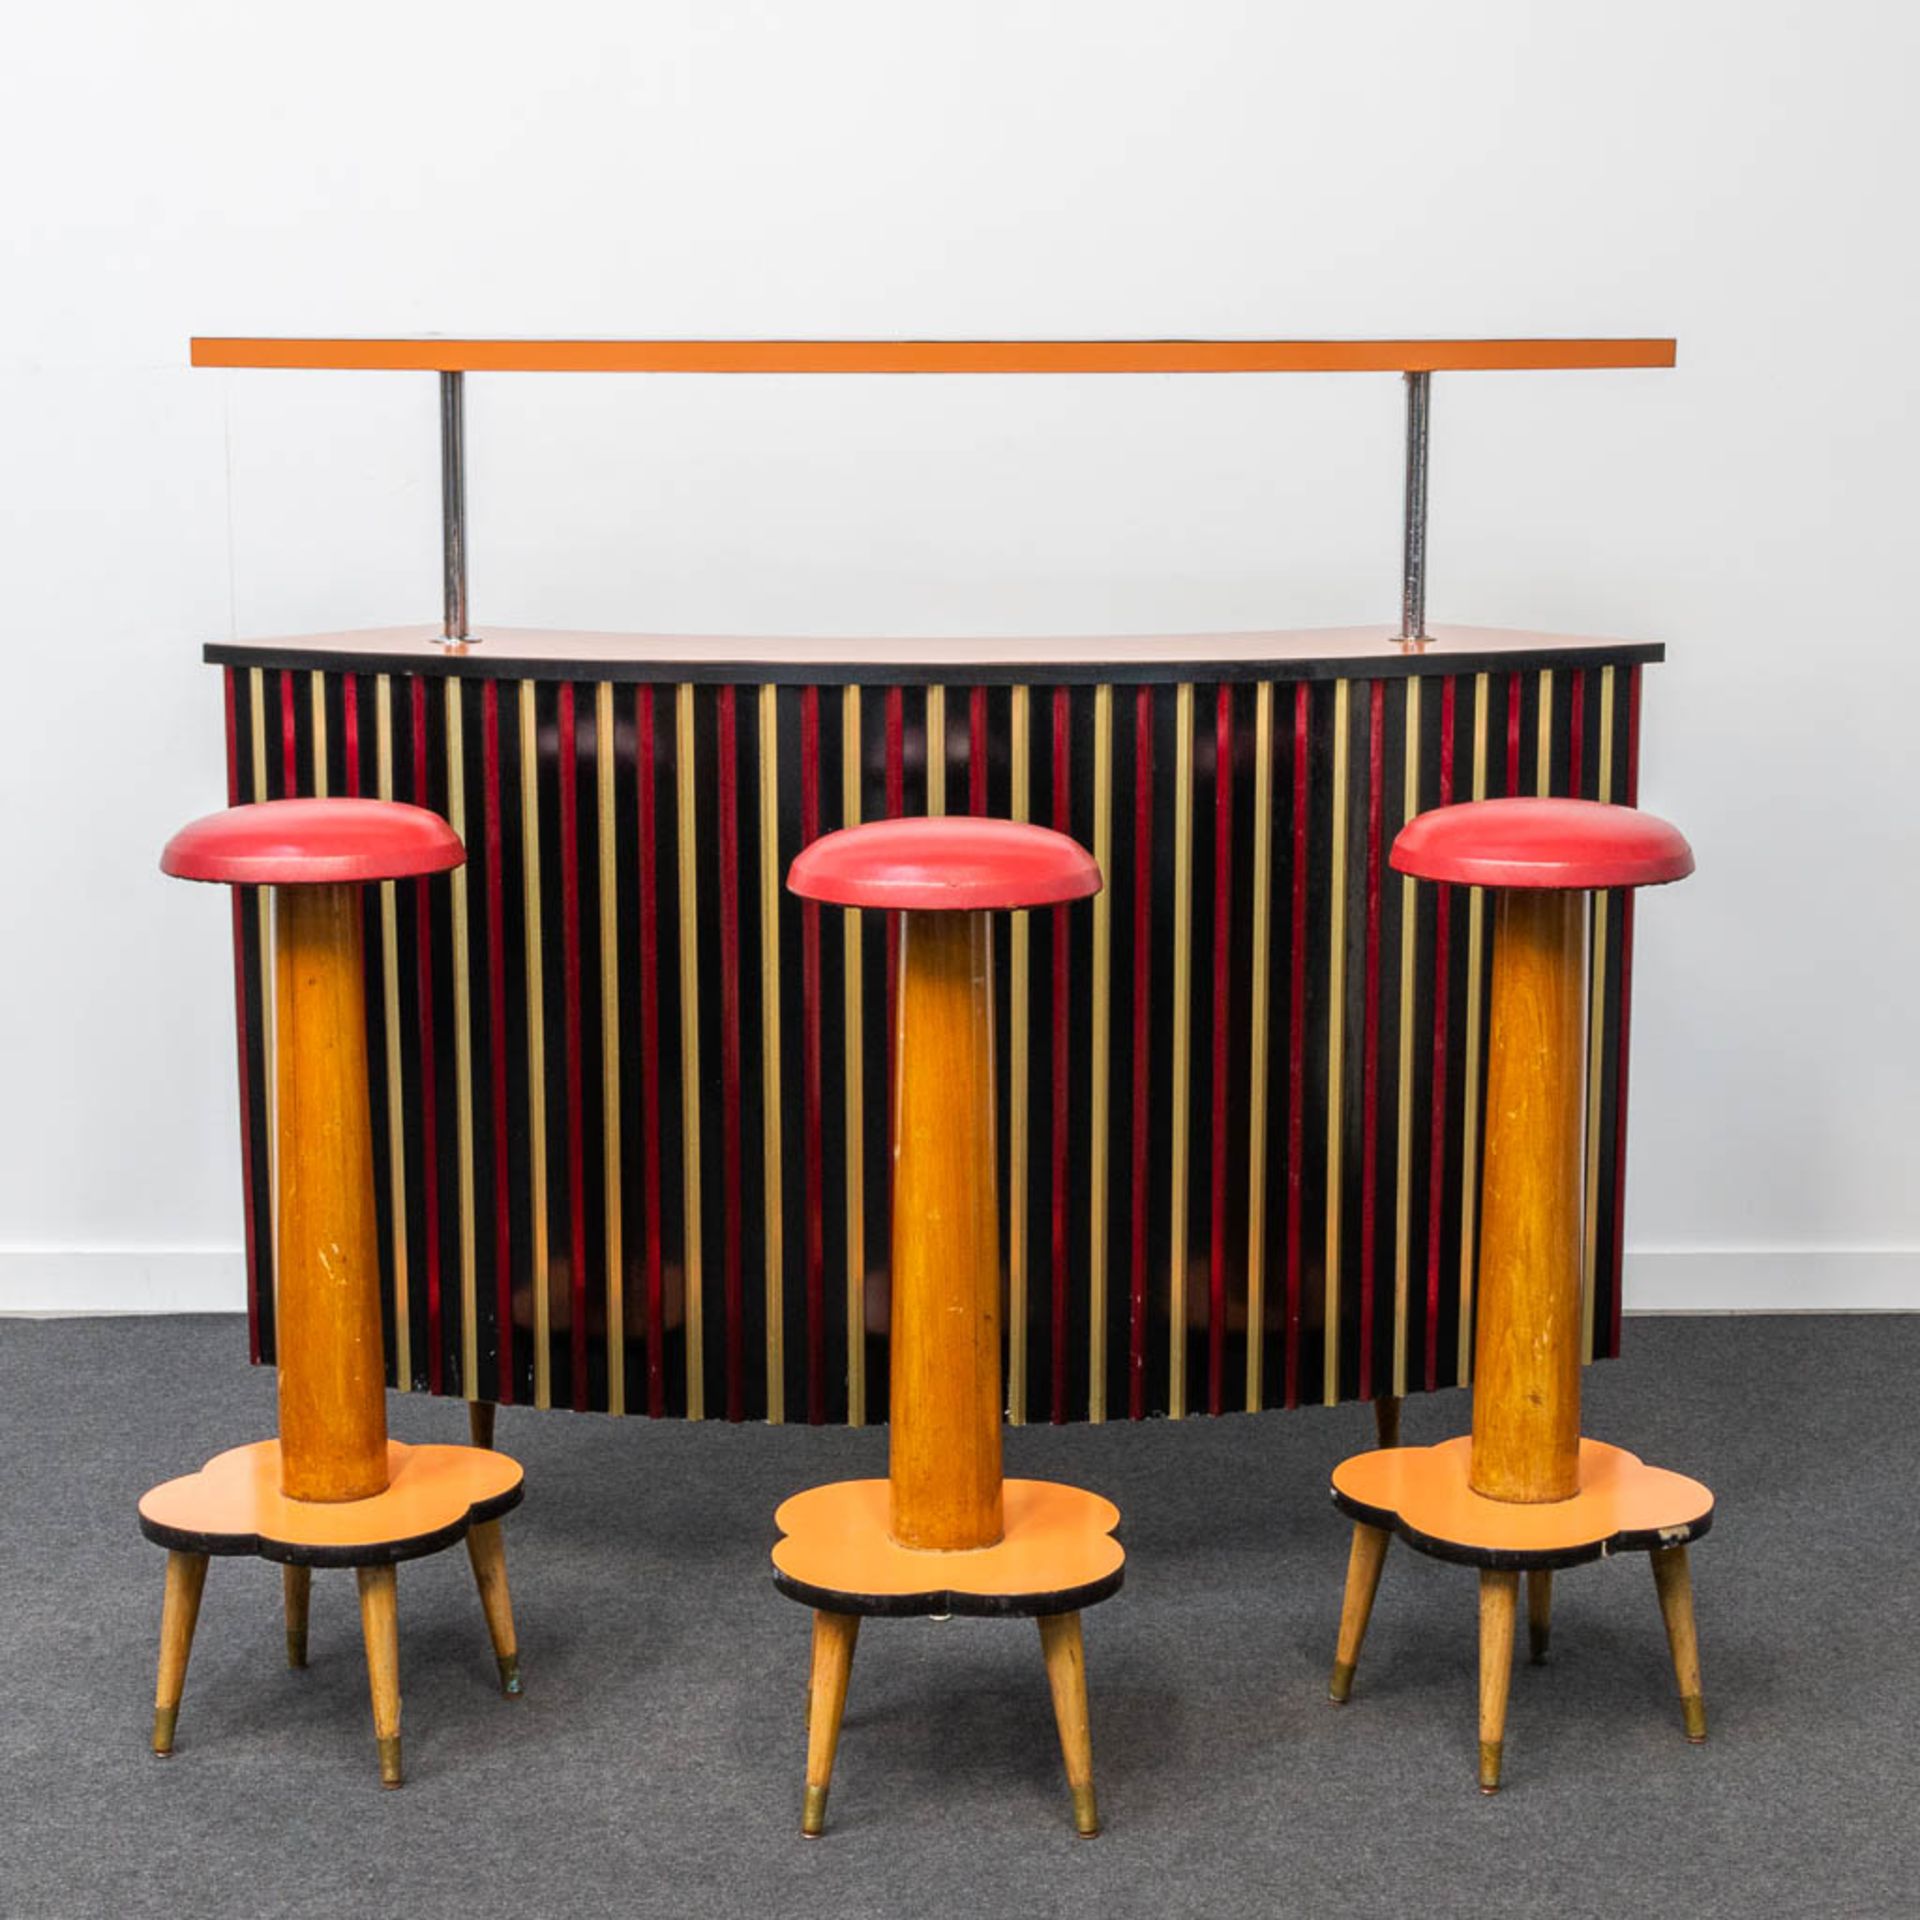 A vintage bar cabinet, made of formica and chrome, sided by 3 bar stools. - Image 9 of 19